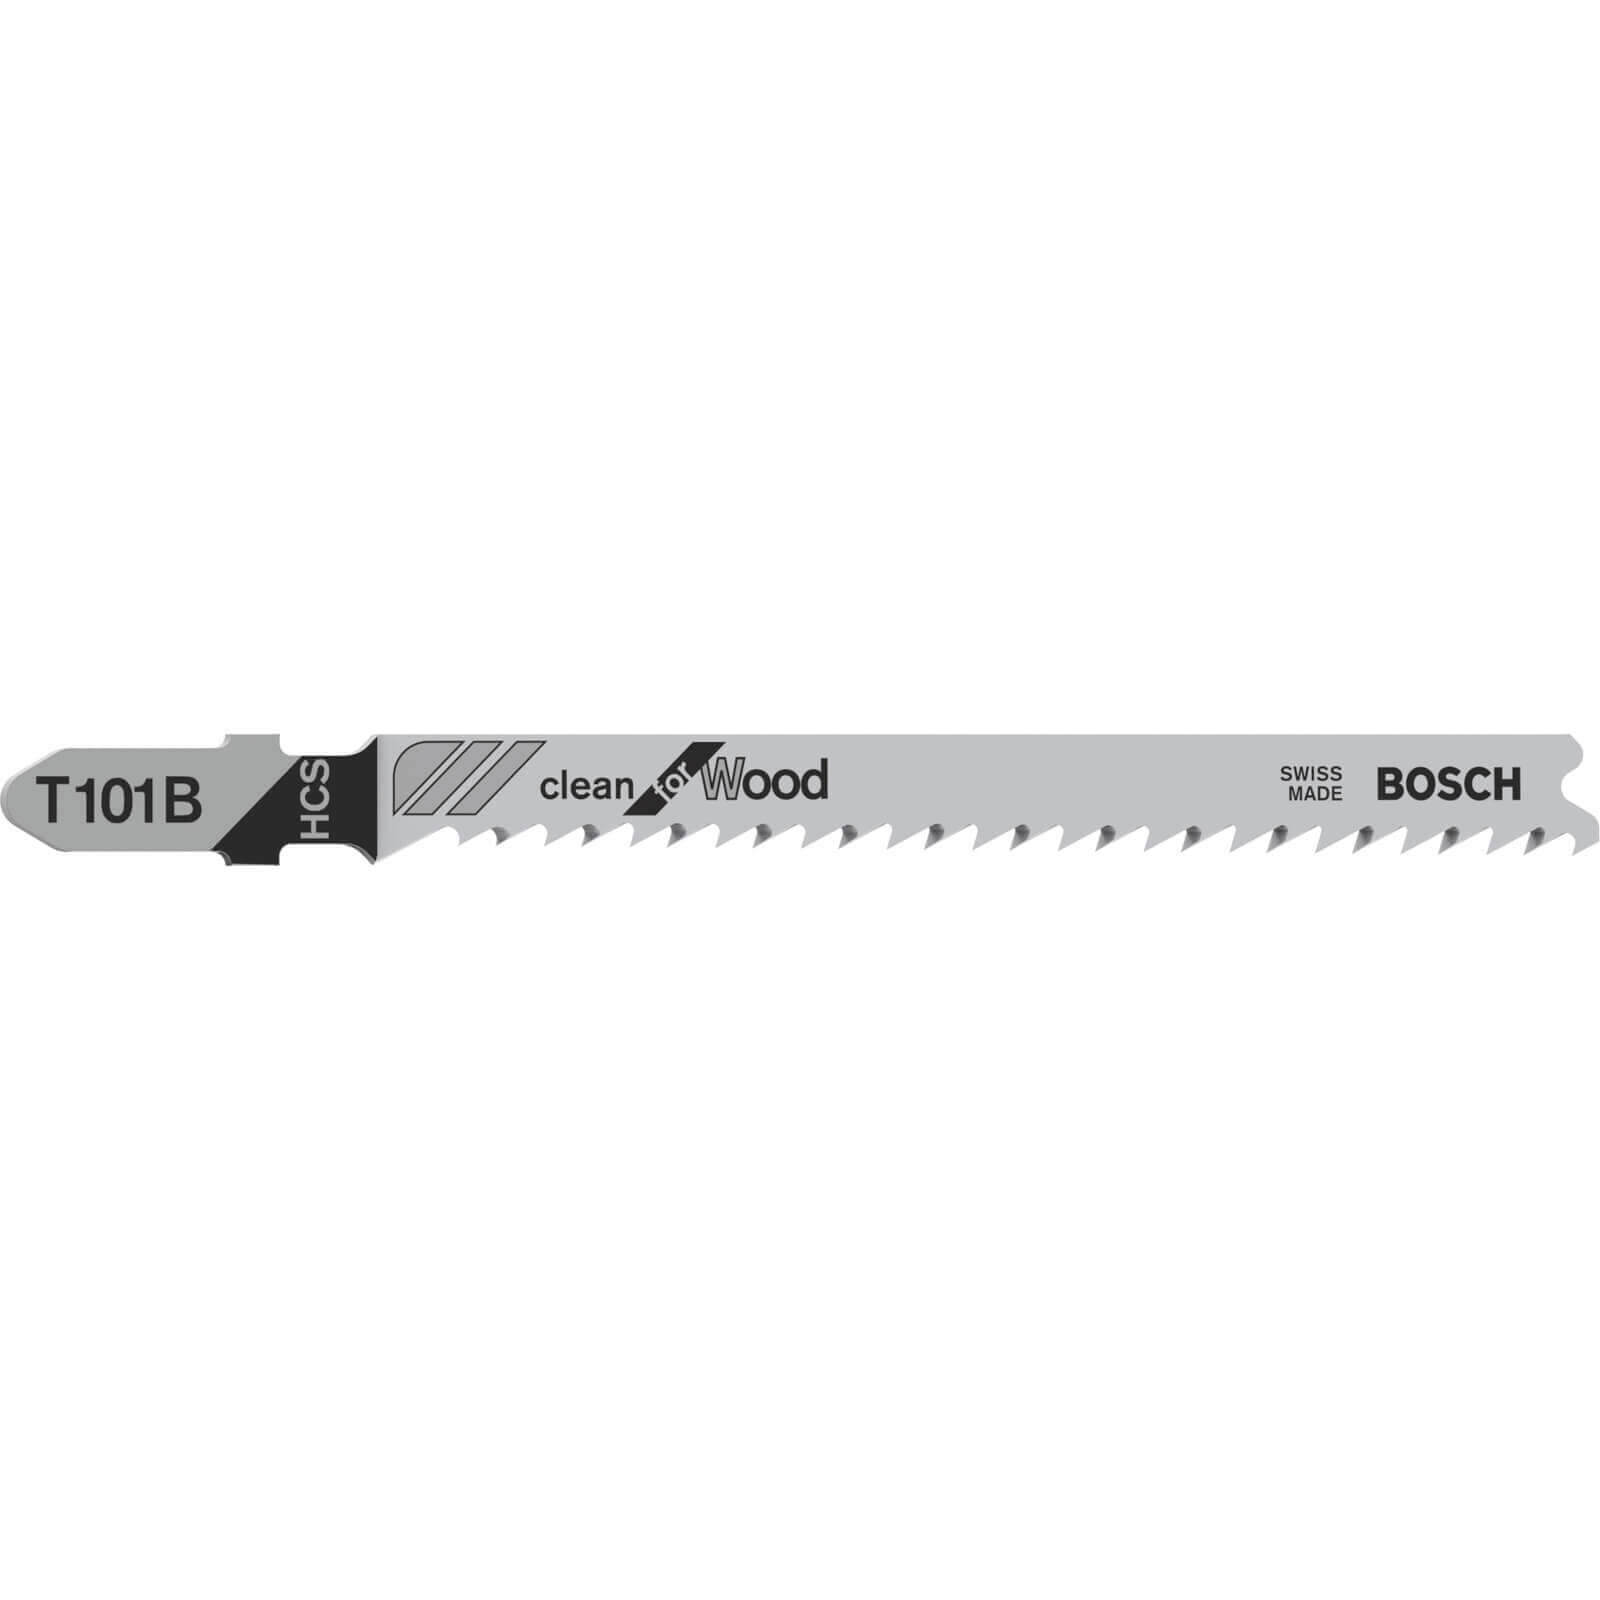 Image of Bosch T101 B Wood Cutting Jigsaw Blades Pack of 5